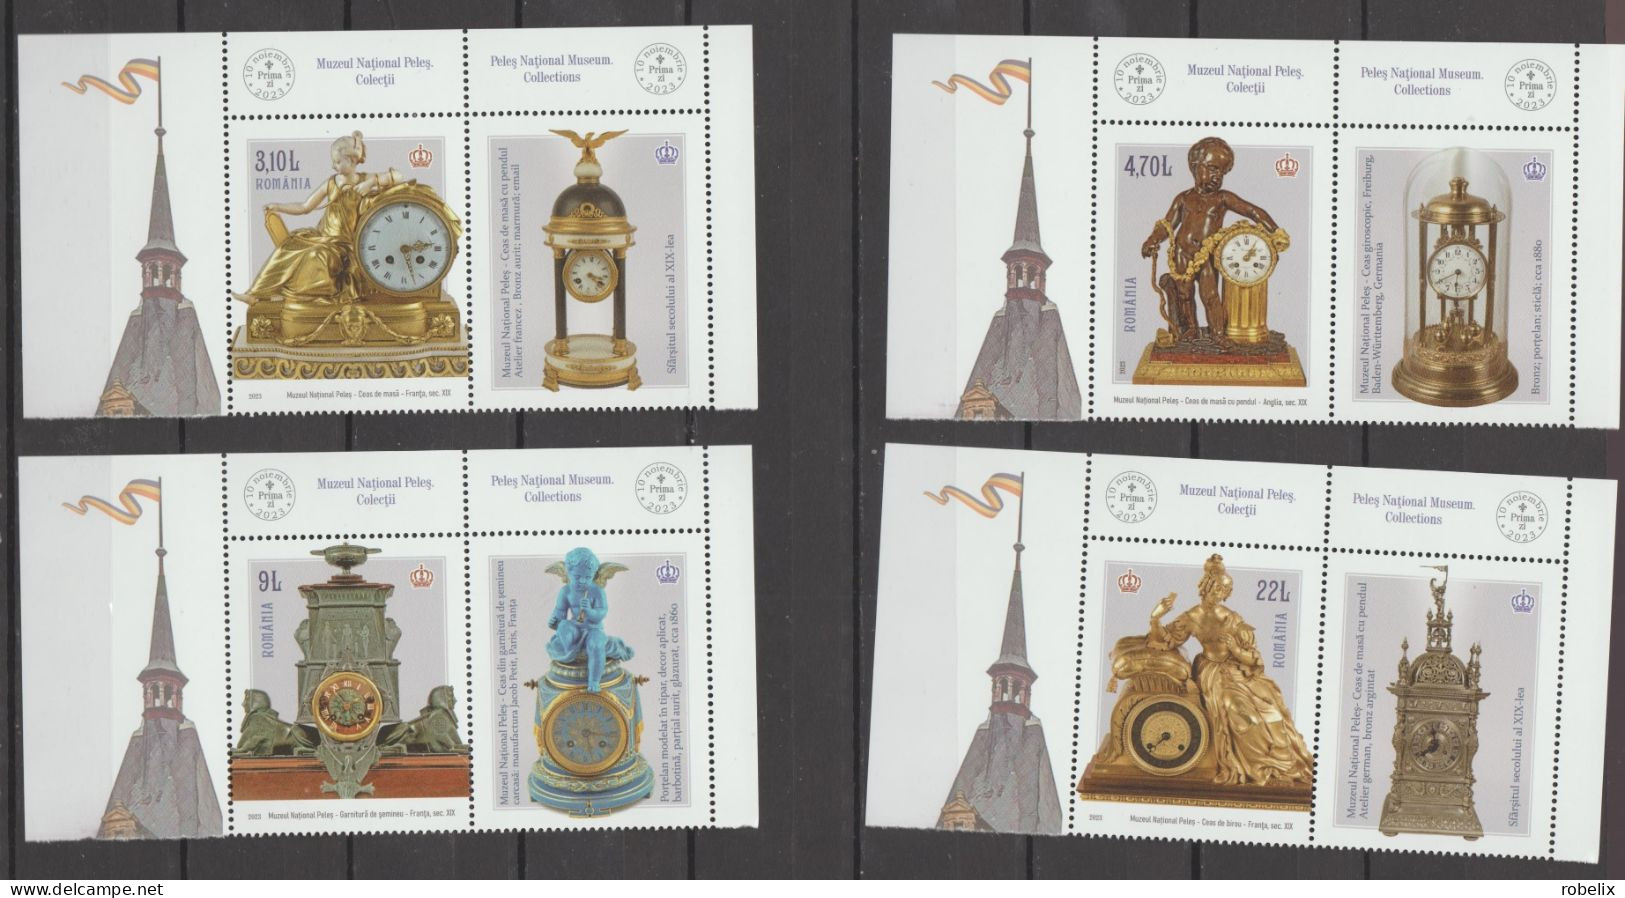 ROMANIA 2023  PELEȘ NATIONAL MUSEUM - COLLECTIONS - CLOCKS  Set Of 4 Stamps With Labels  MNH** - Uhrmacherei